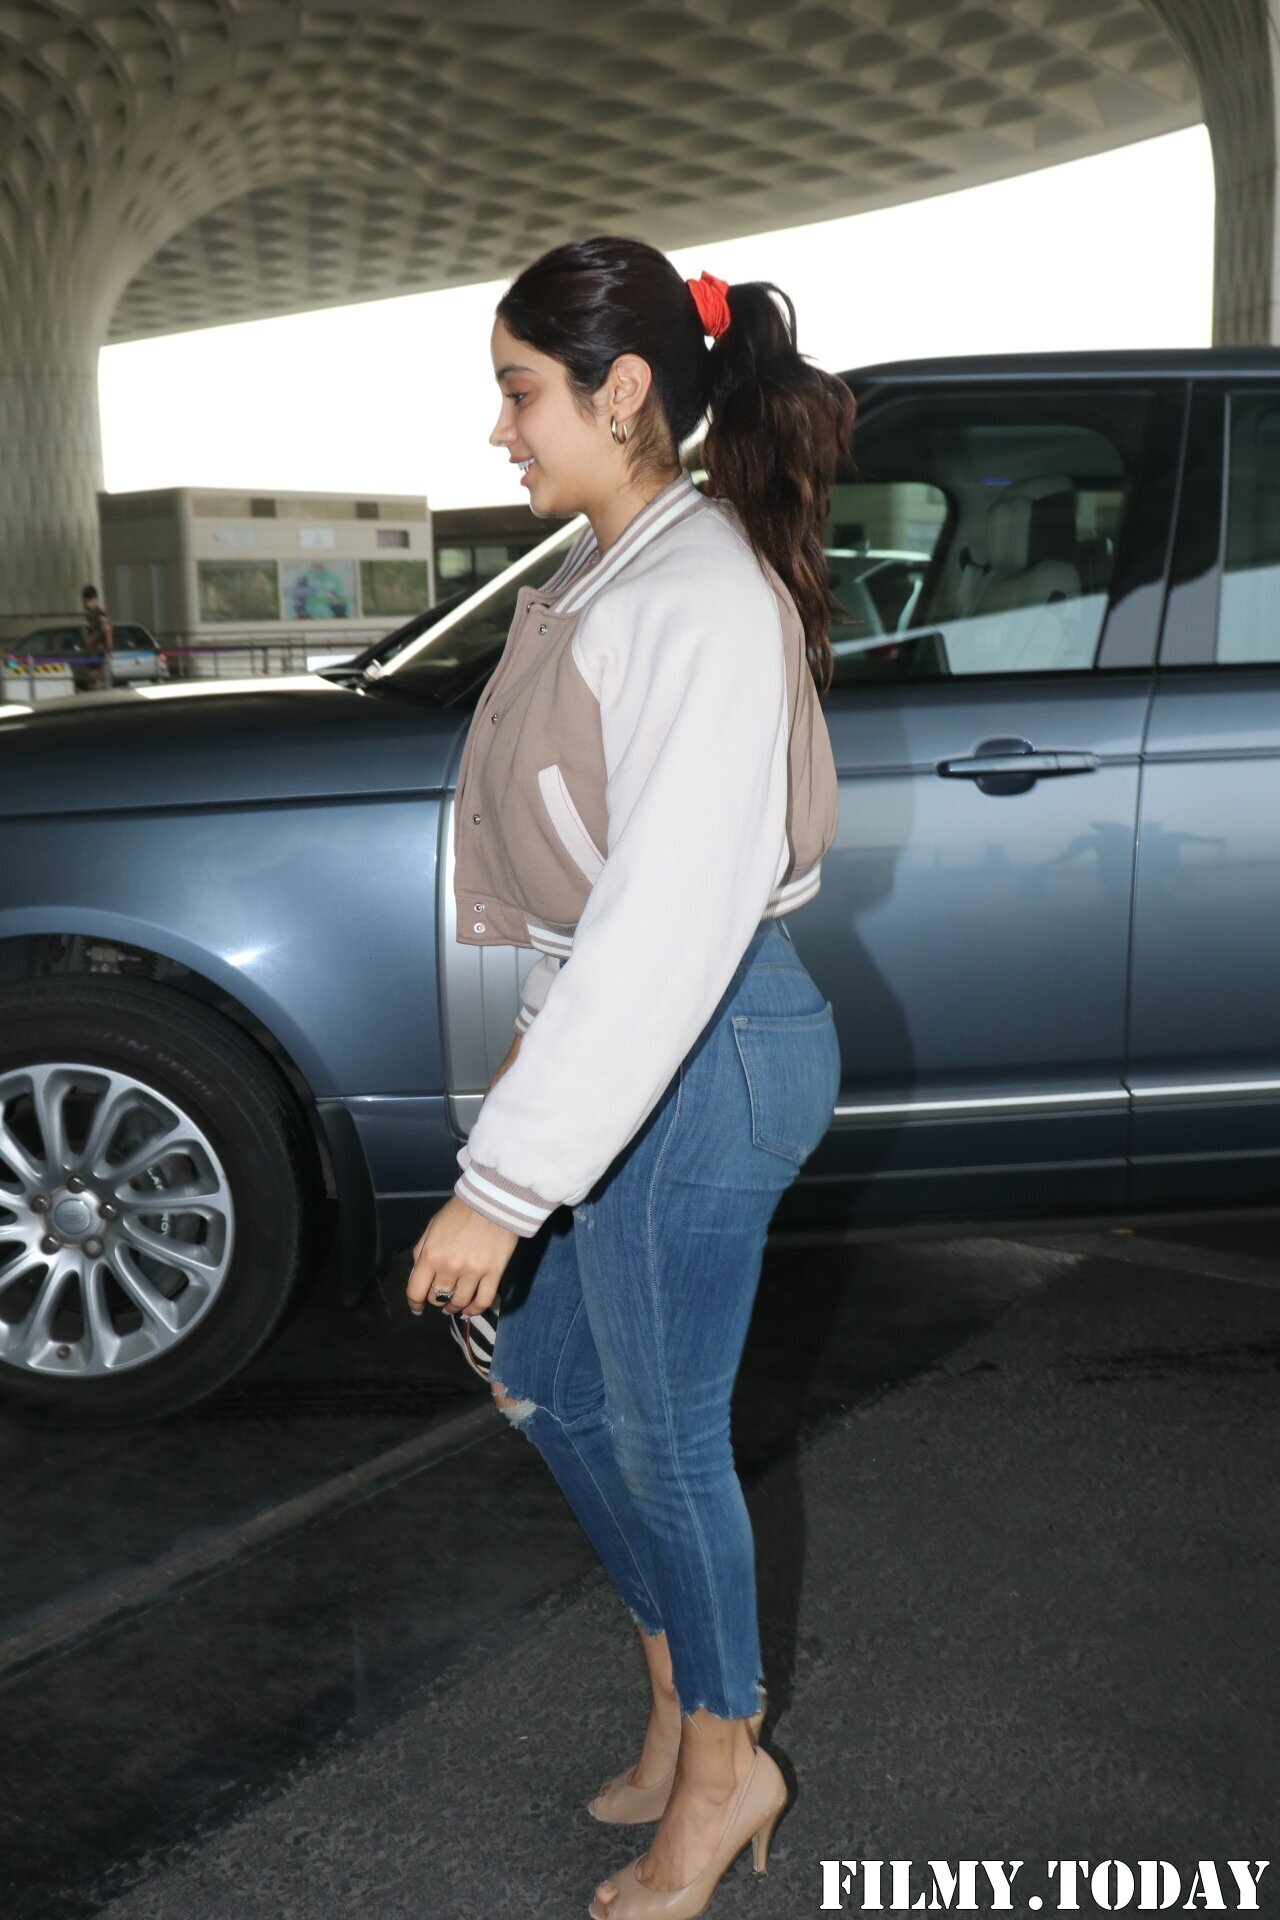 Janhvi Kapoor - Photos: Celebs Spotted At Airport | Picture 1867138